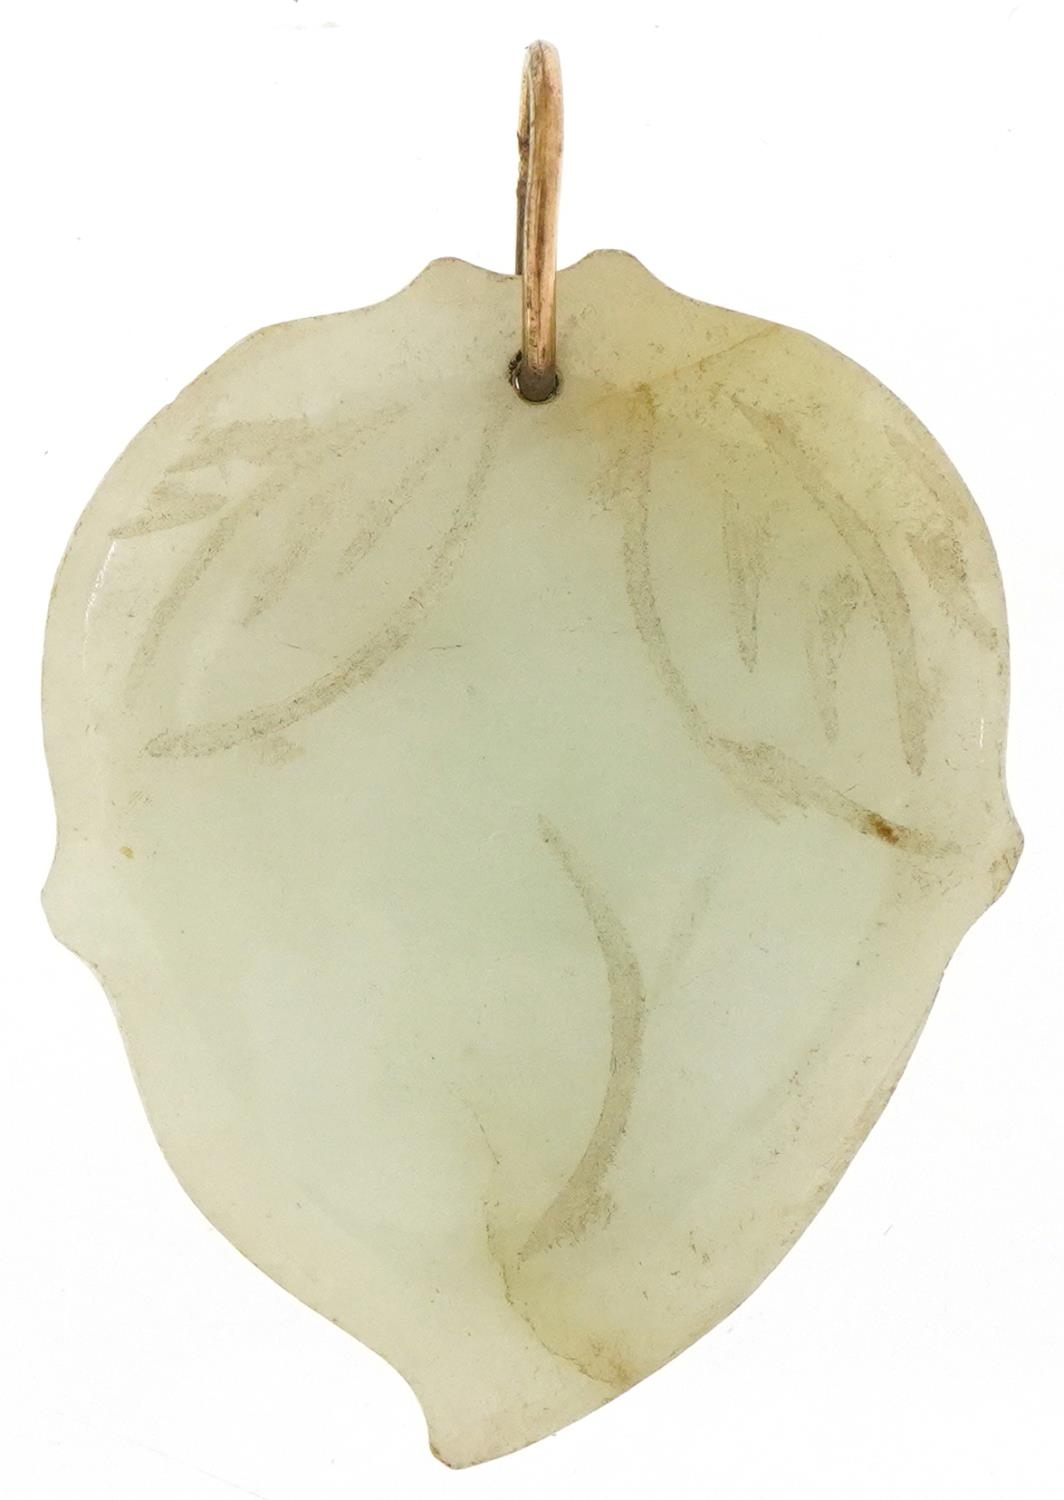 Chinese carved russet jade pendant with yellow metal suspension loop, 3cm high, 6.2g - Image 2 of 3